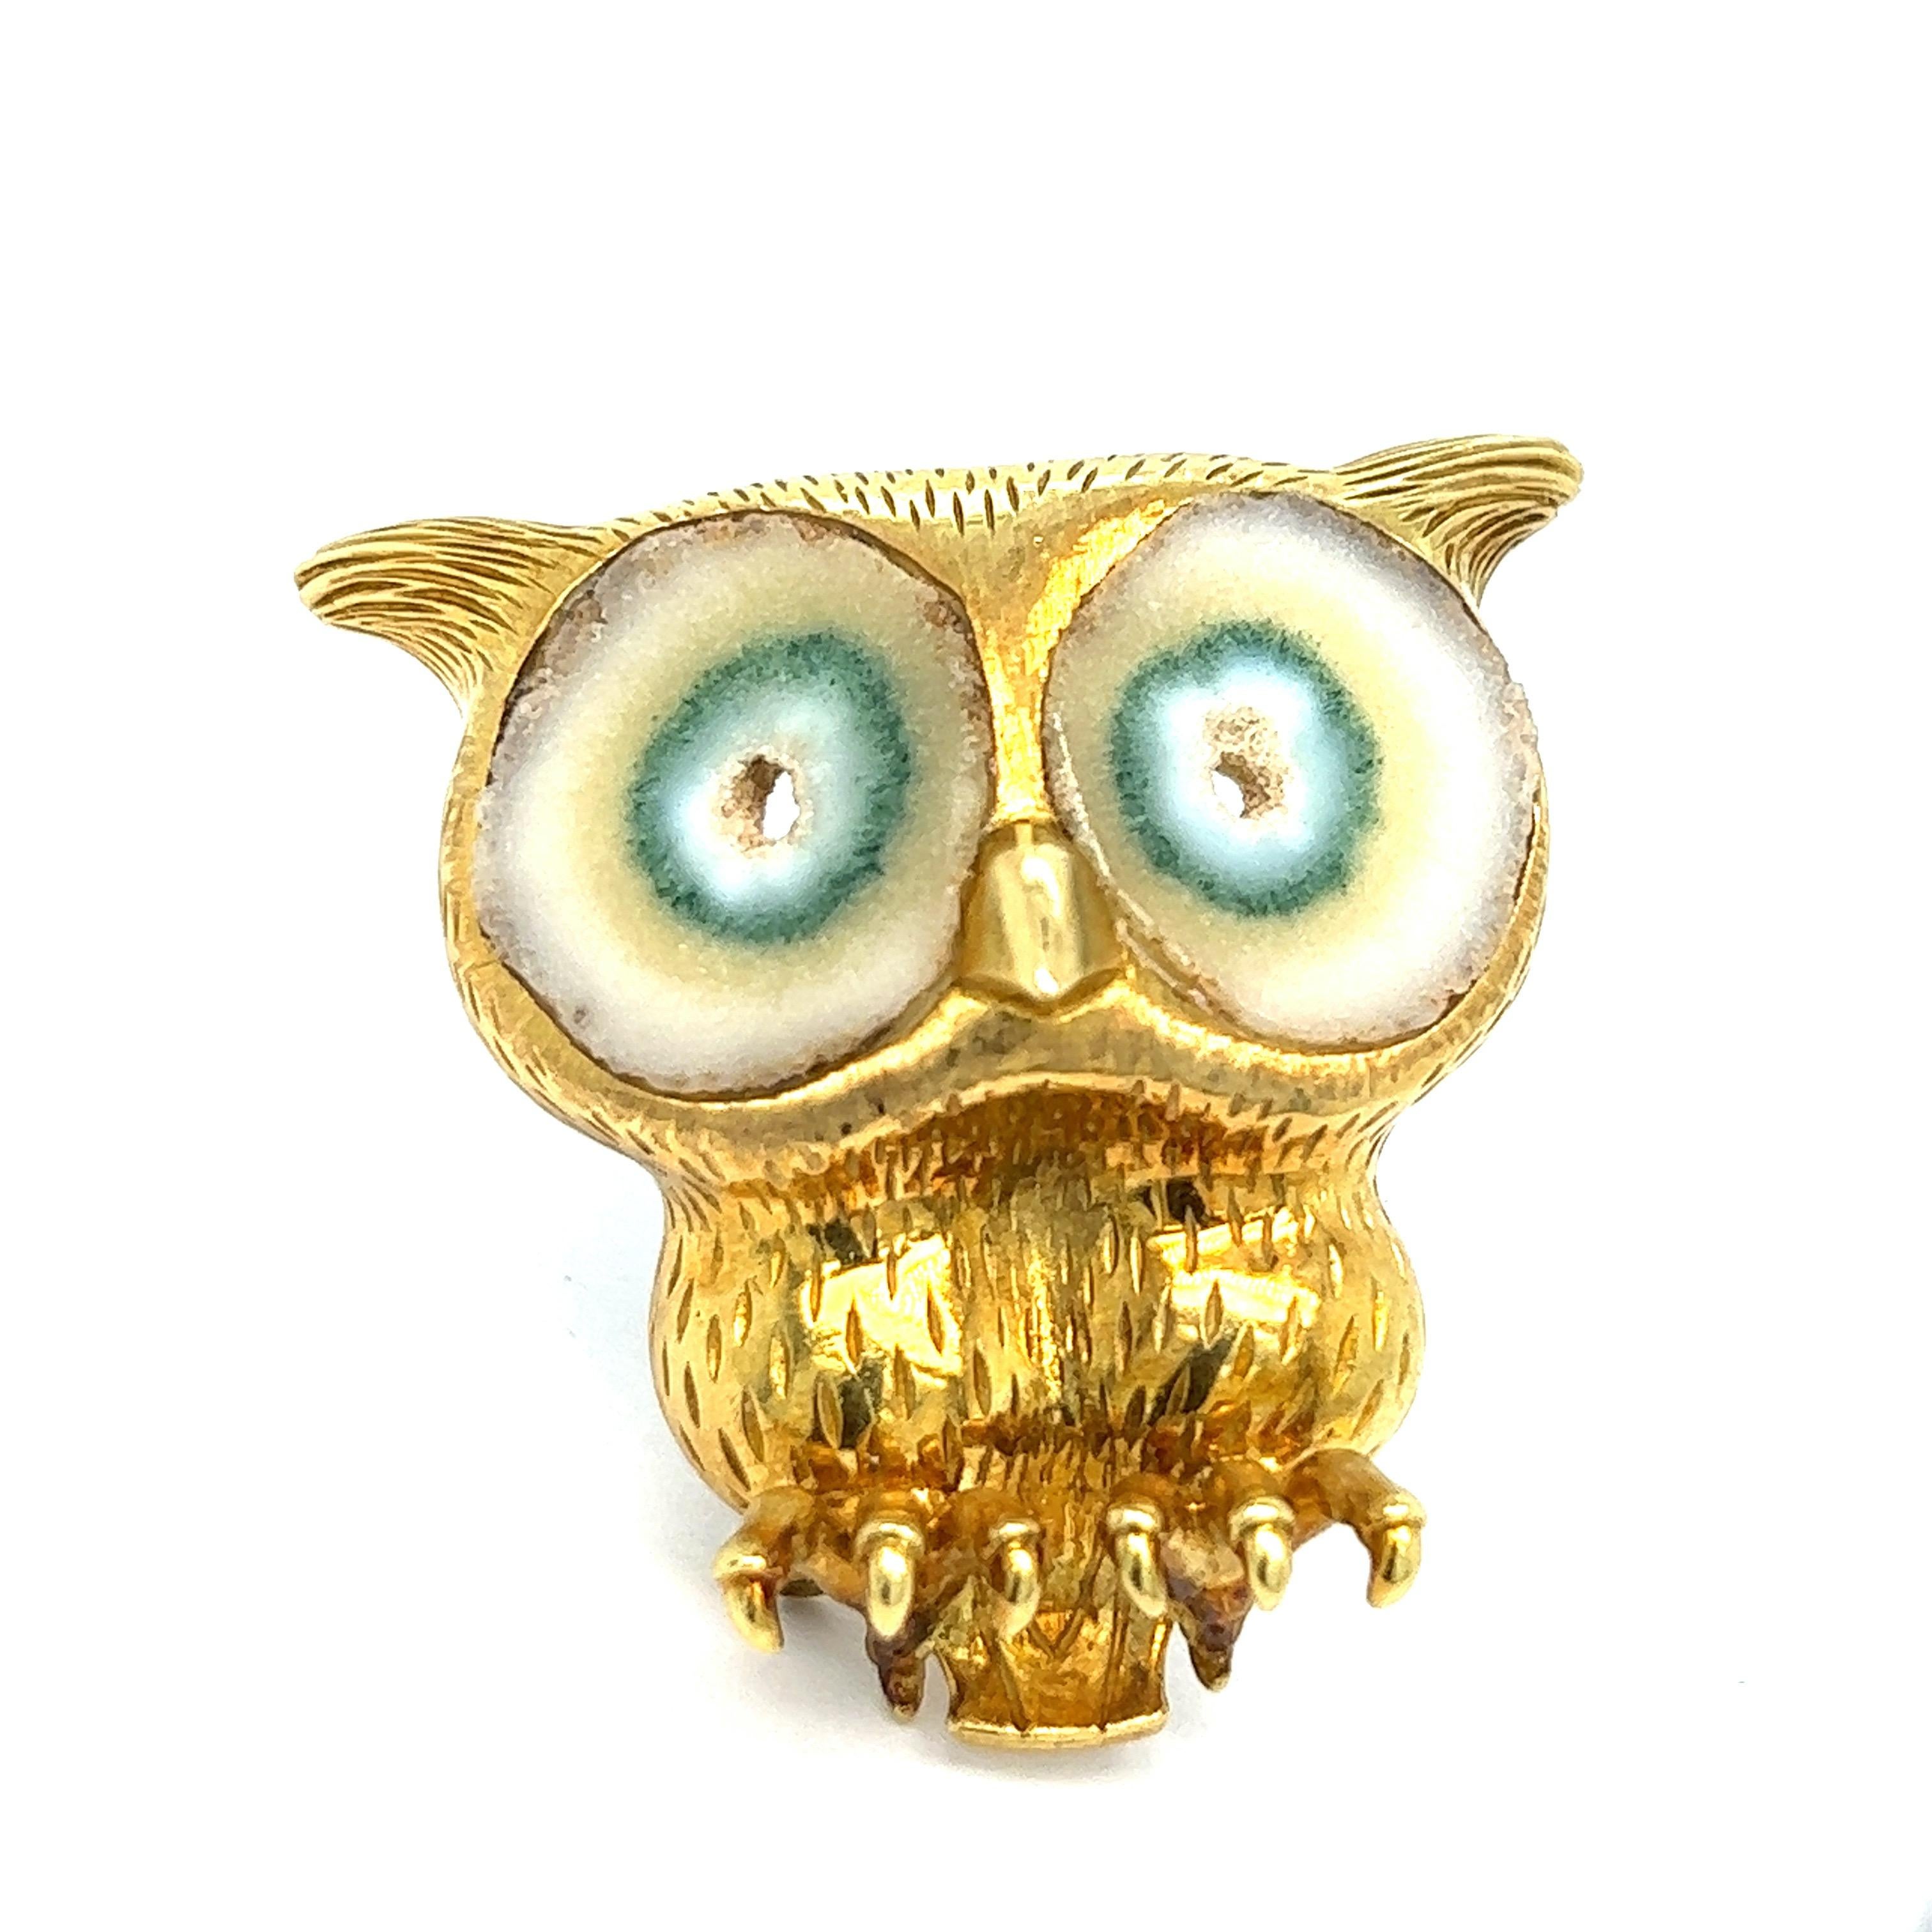 French owl agate gold brooch

Agate eyes, 18 karat yellow gold

Size: width 1.63 inches, length 1.63 inches
Total weight: 25.3 grams